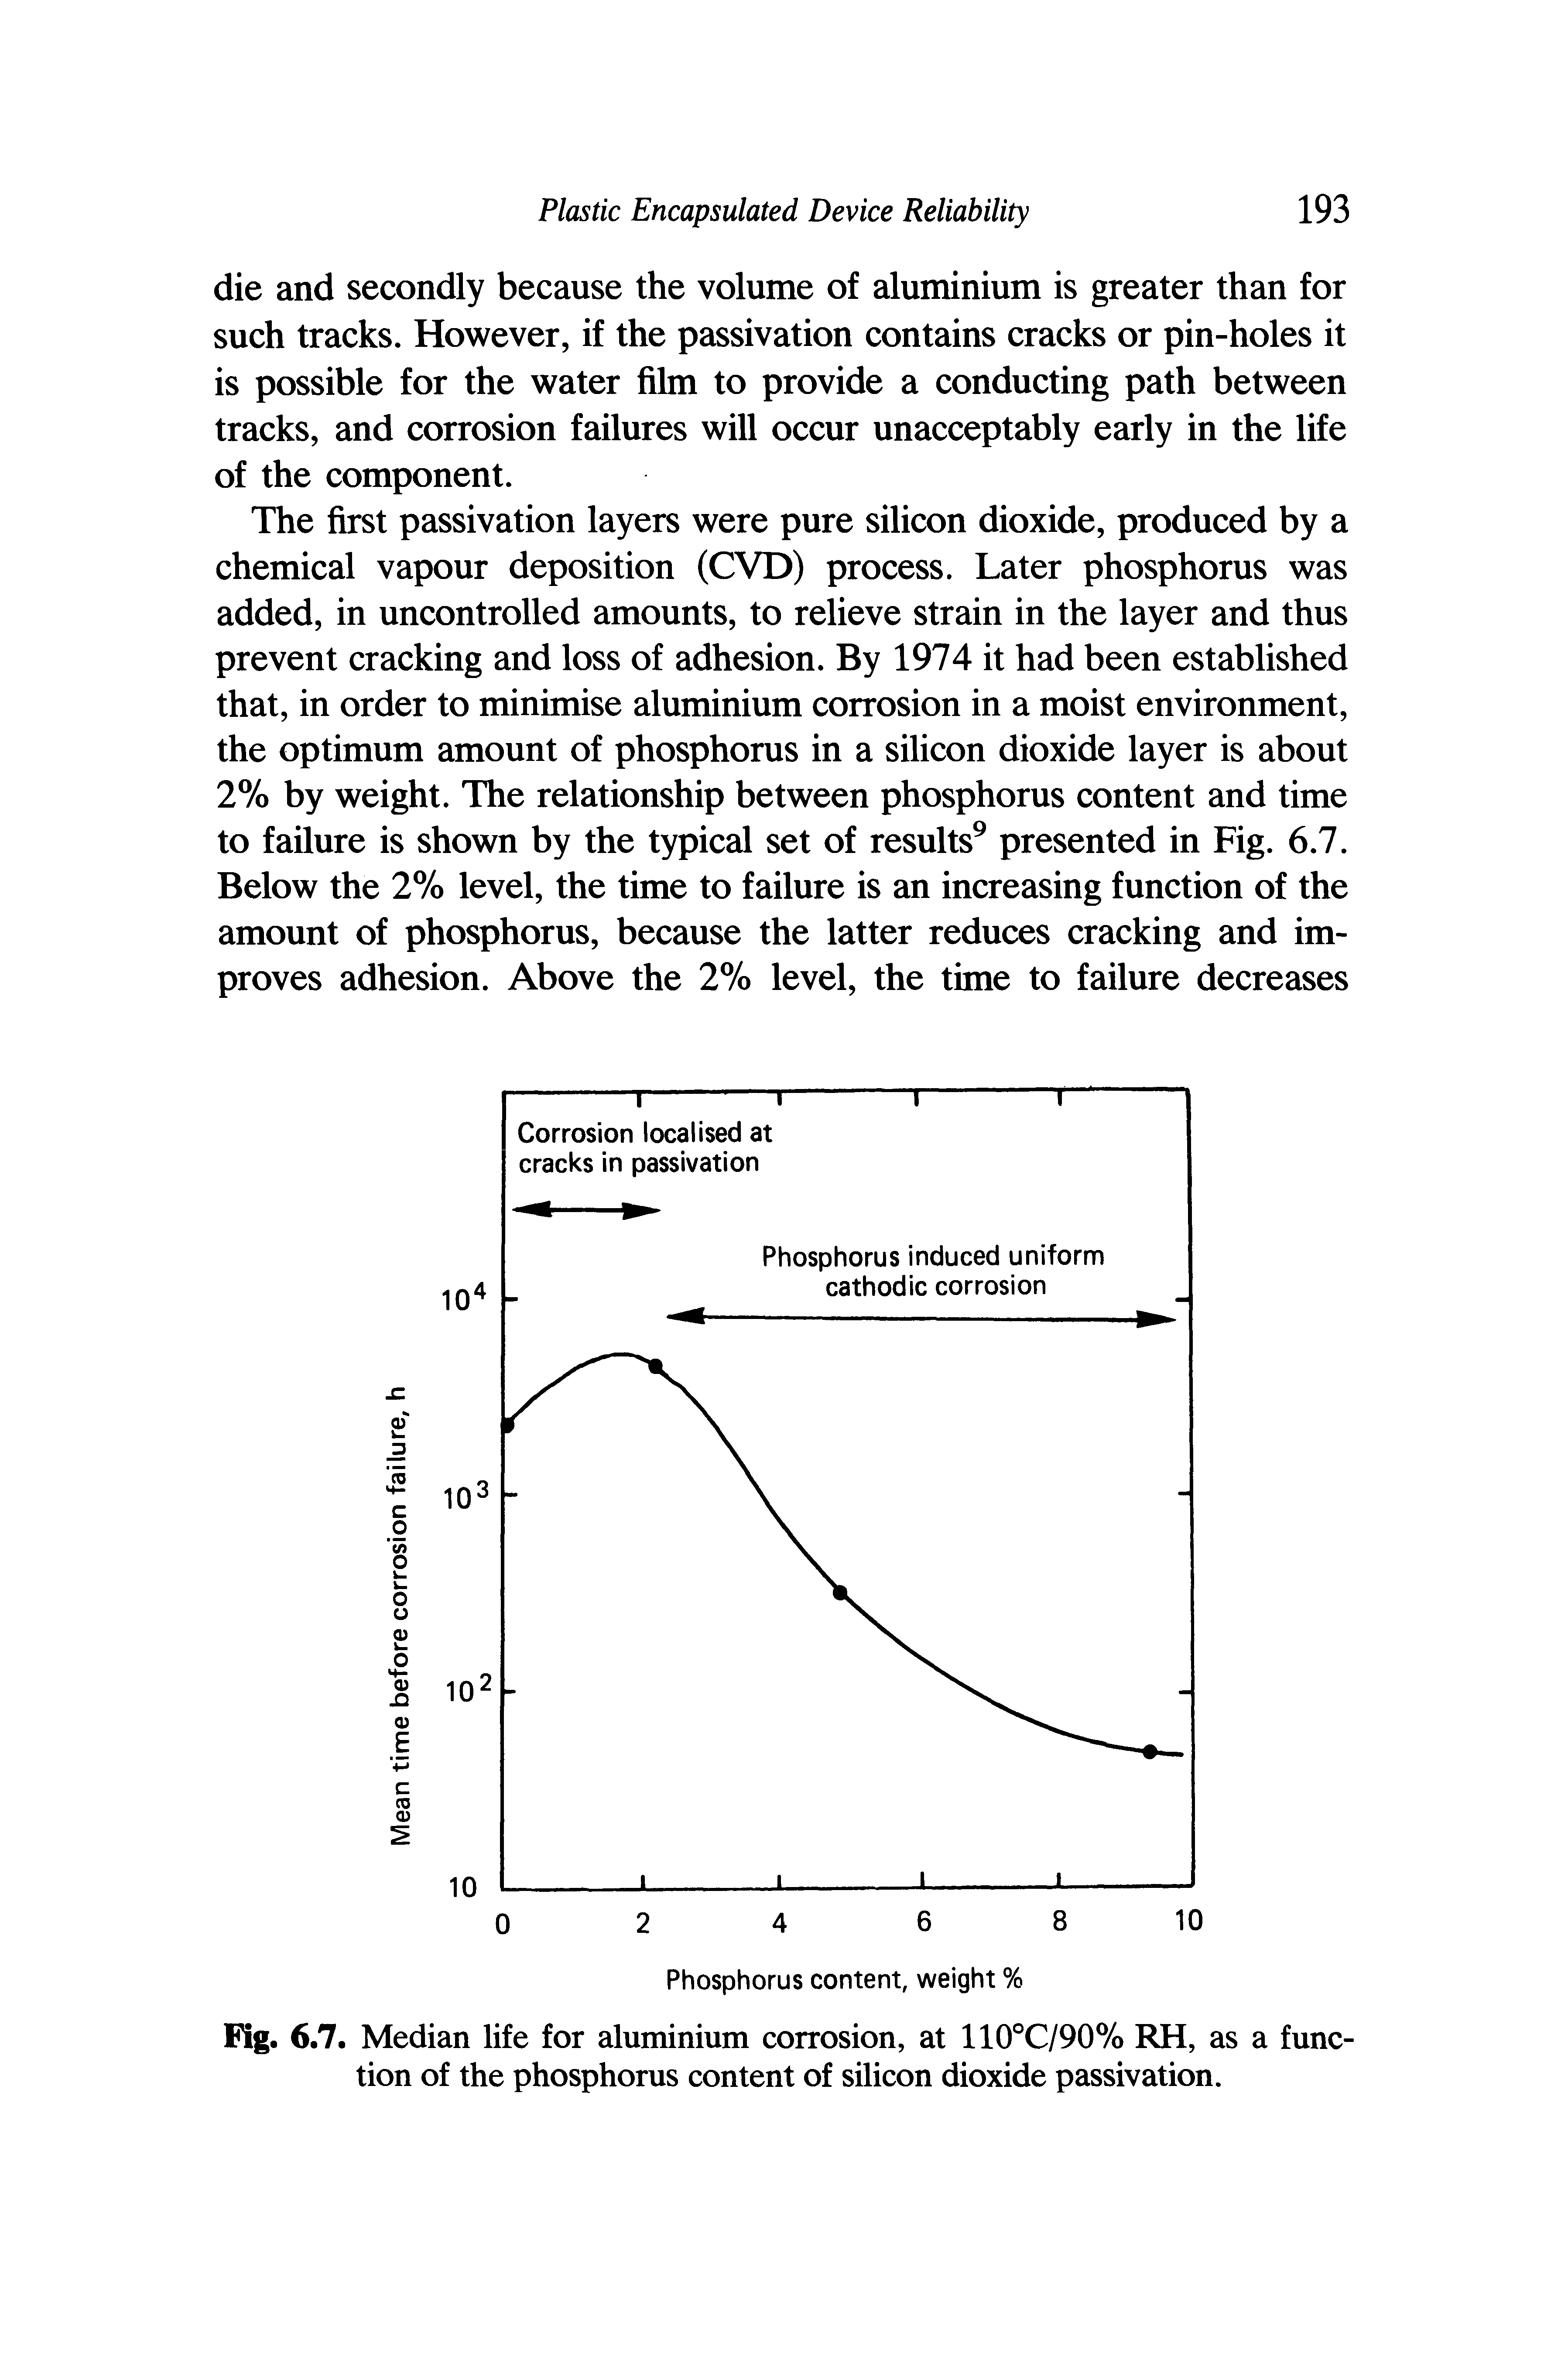 Fig. 6.7. Median life for aluminium corrosion, at 110°C/90% RH, as a function of the phosphorus content of silicon dioxide passivation.